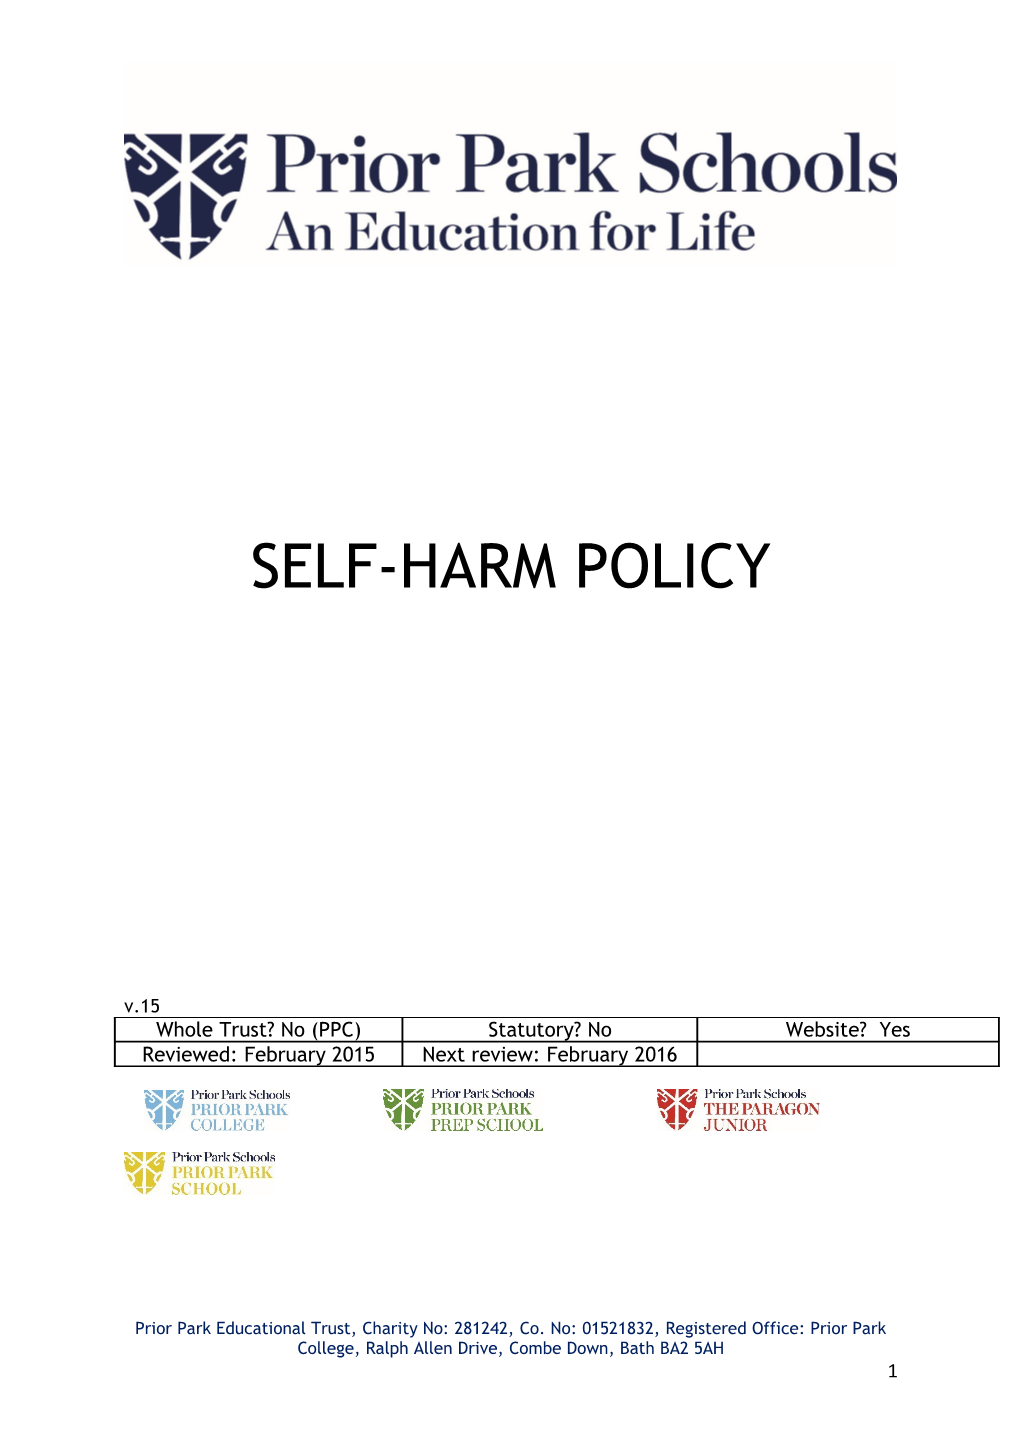 Self-Harm Is a Coping Mechanism for Individuals Who Are Attempting to Manage Challenging